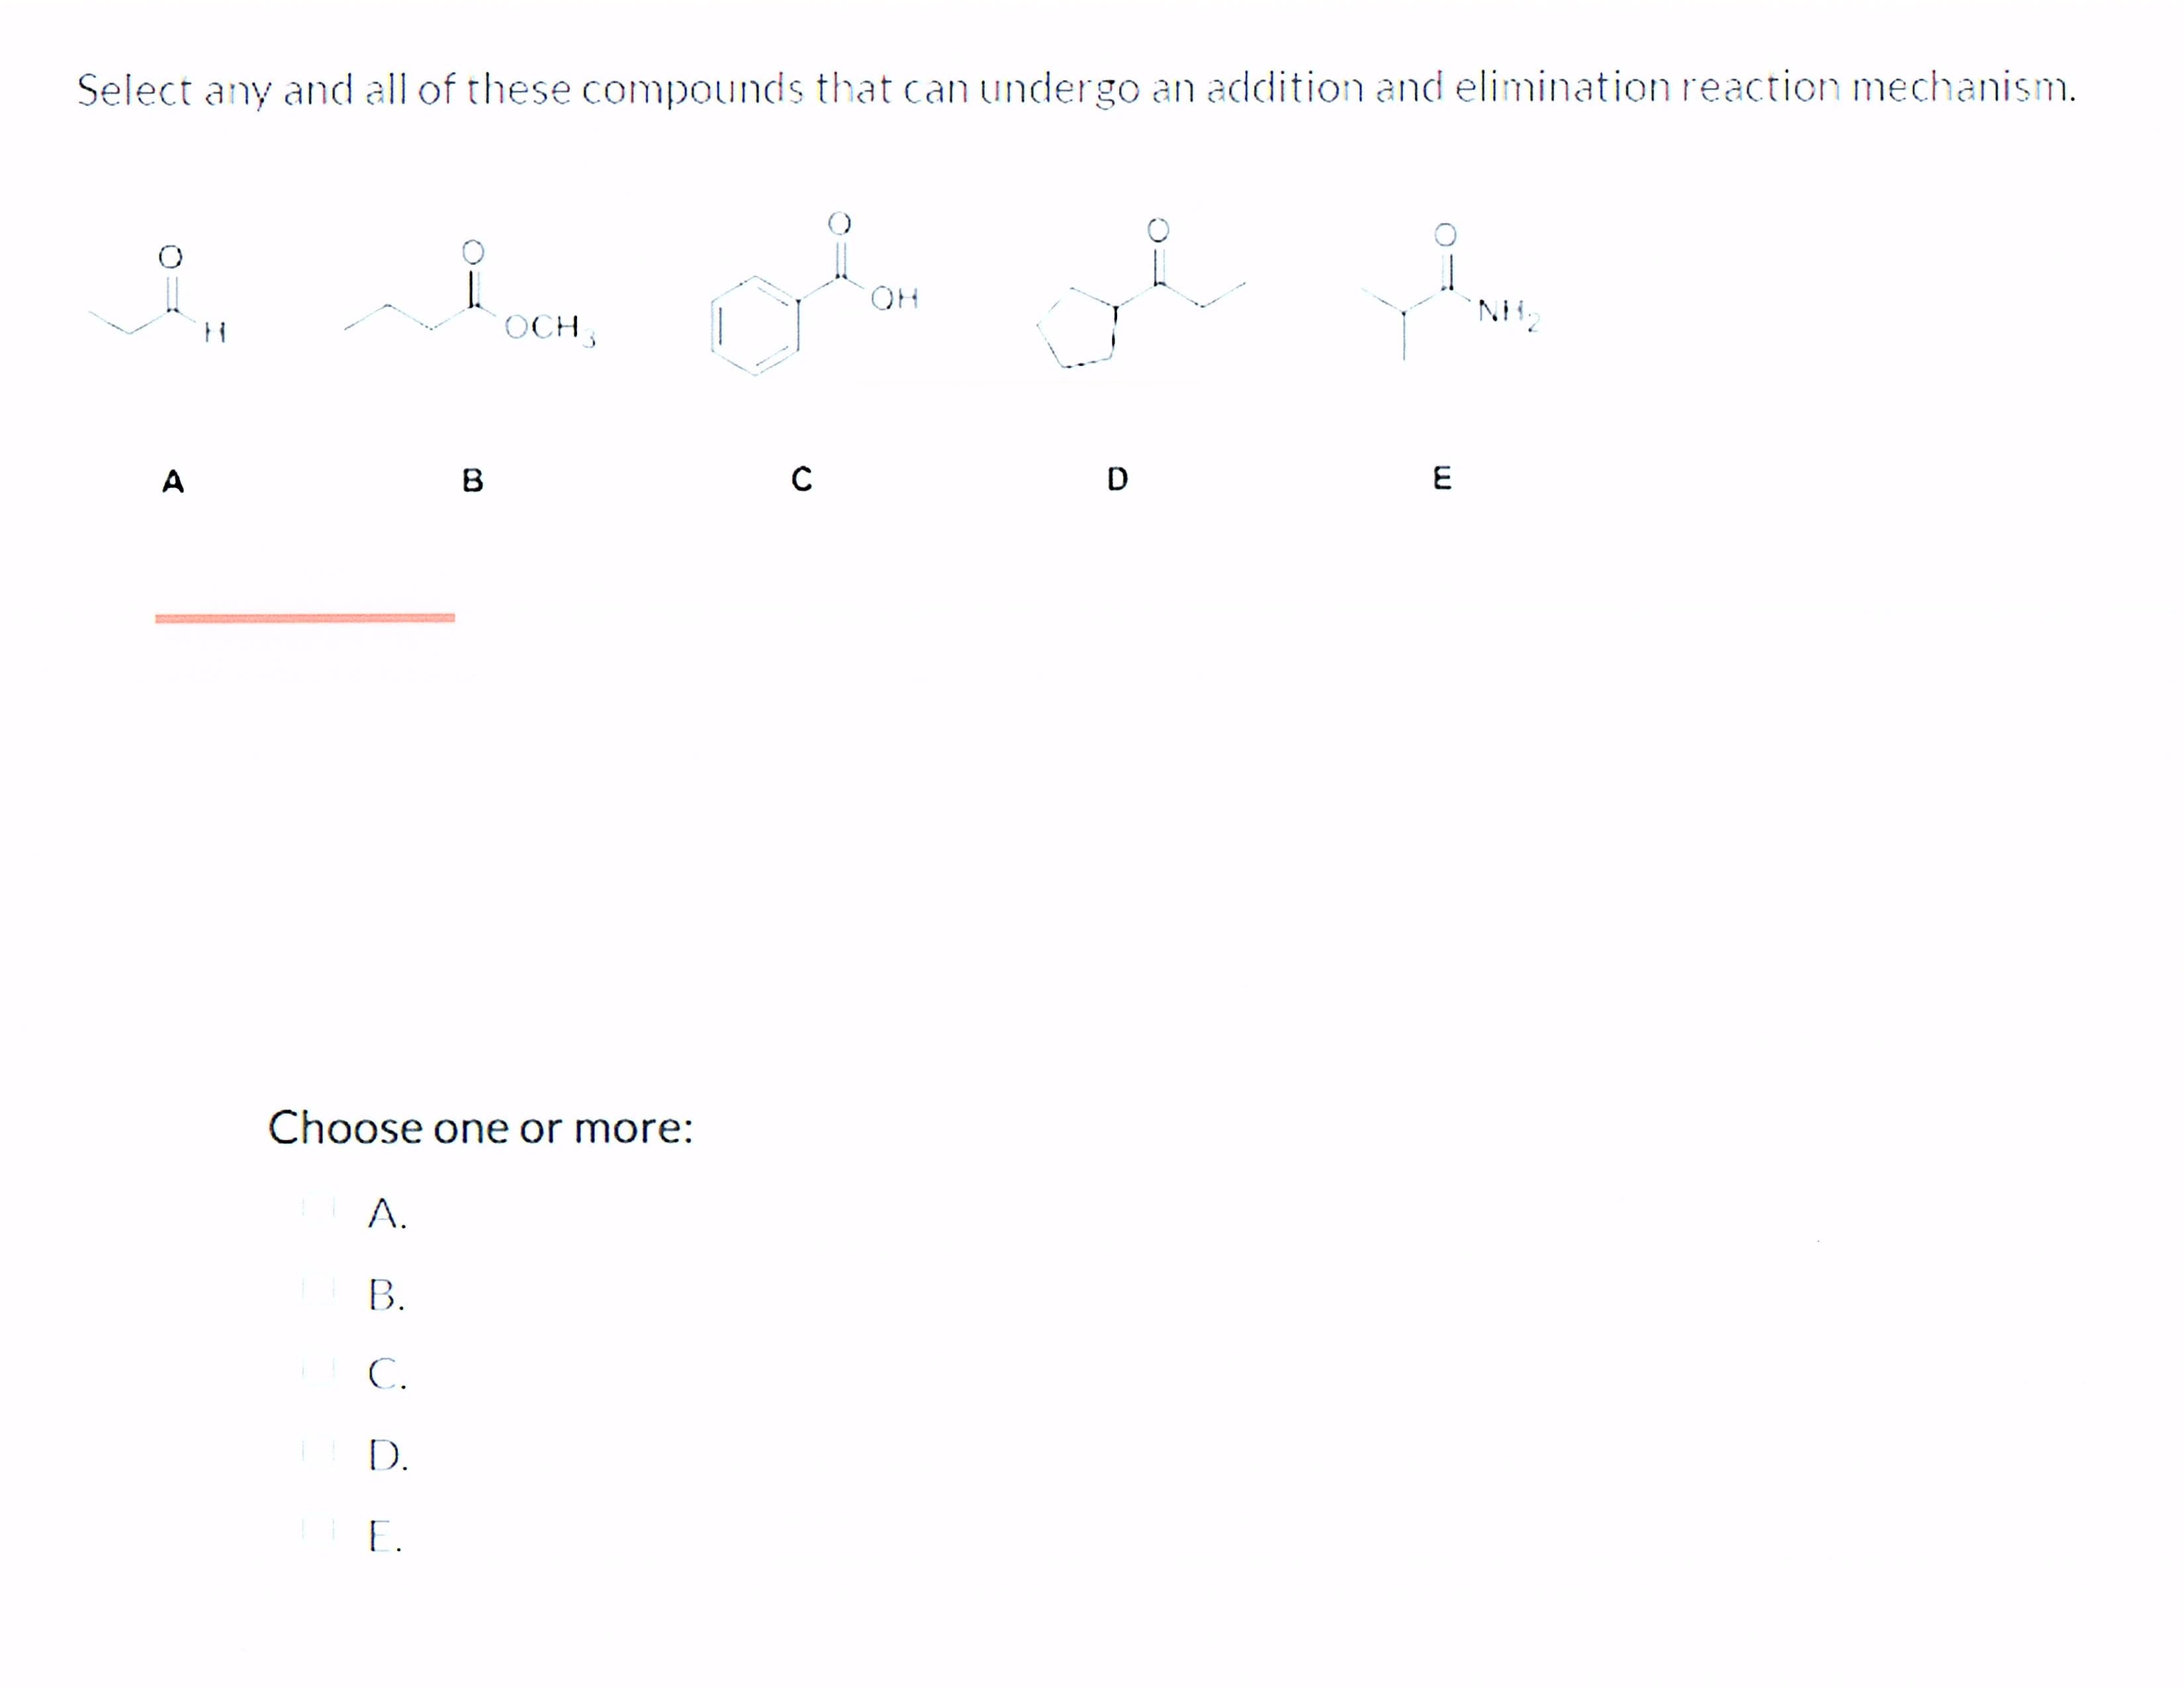 Select any and all of these compounds that can undergo an addition and elimination reaction mechanism.
OH
OCH,
A
B
C
D
E
